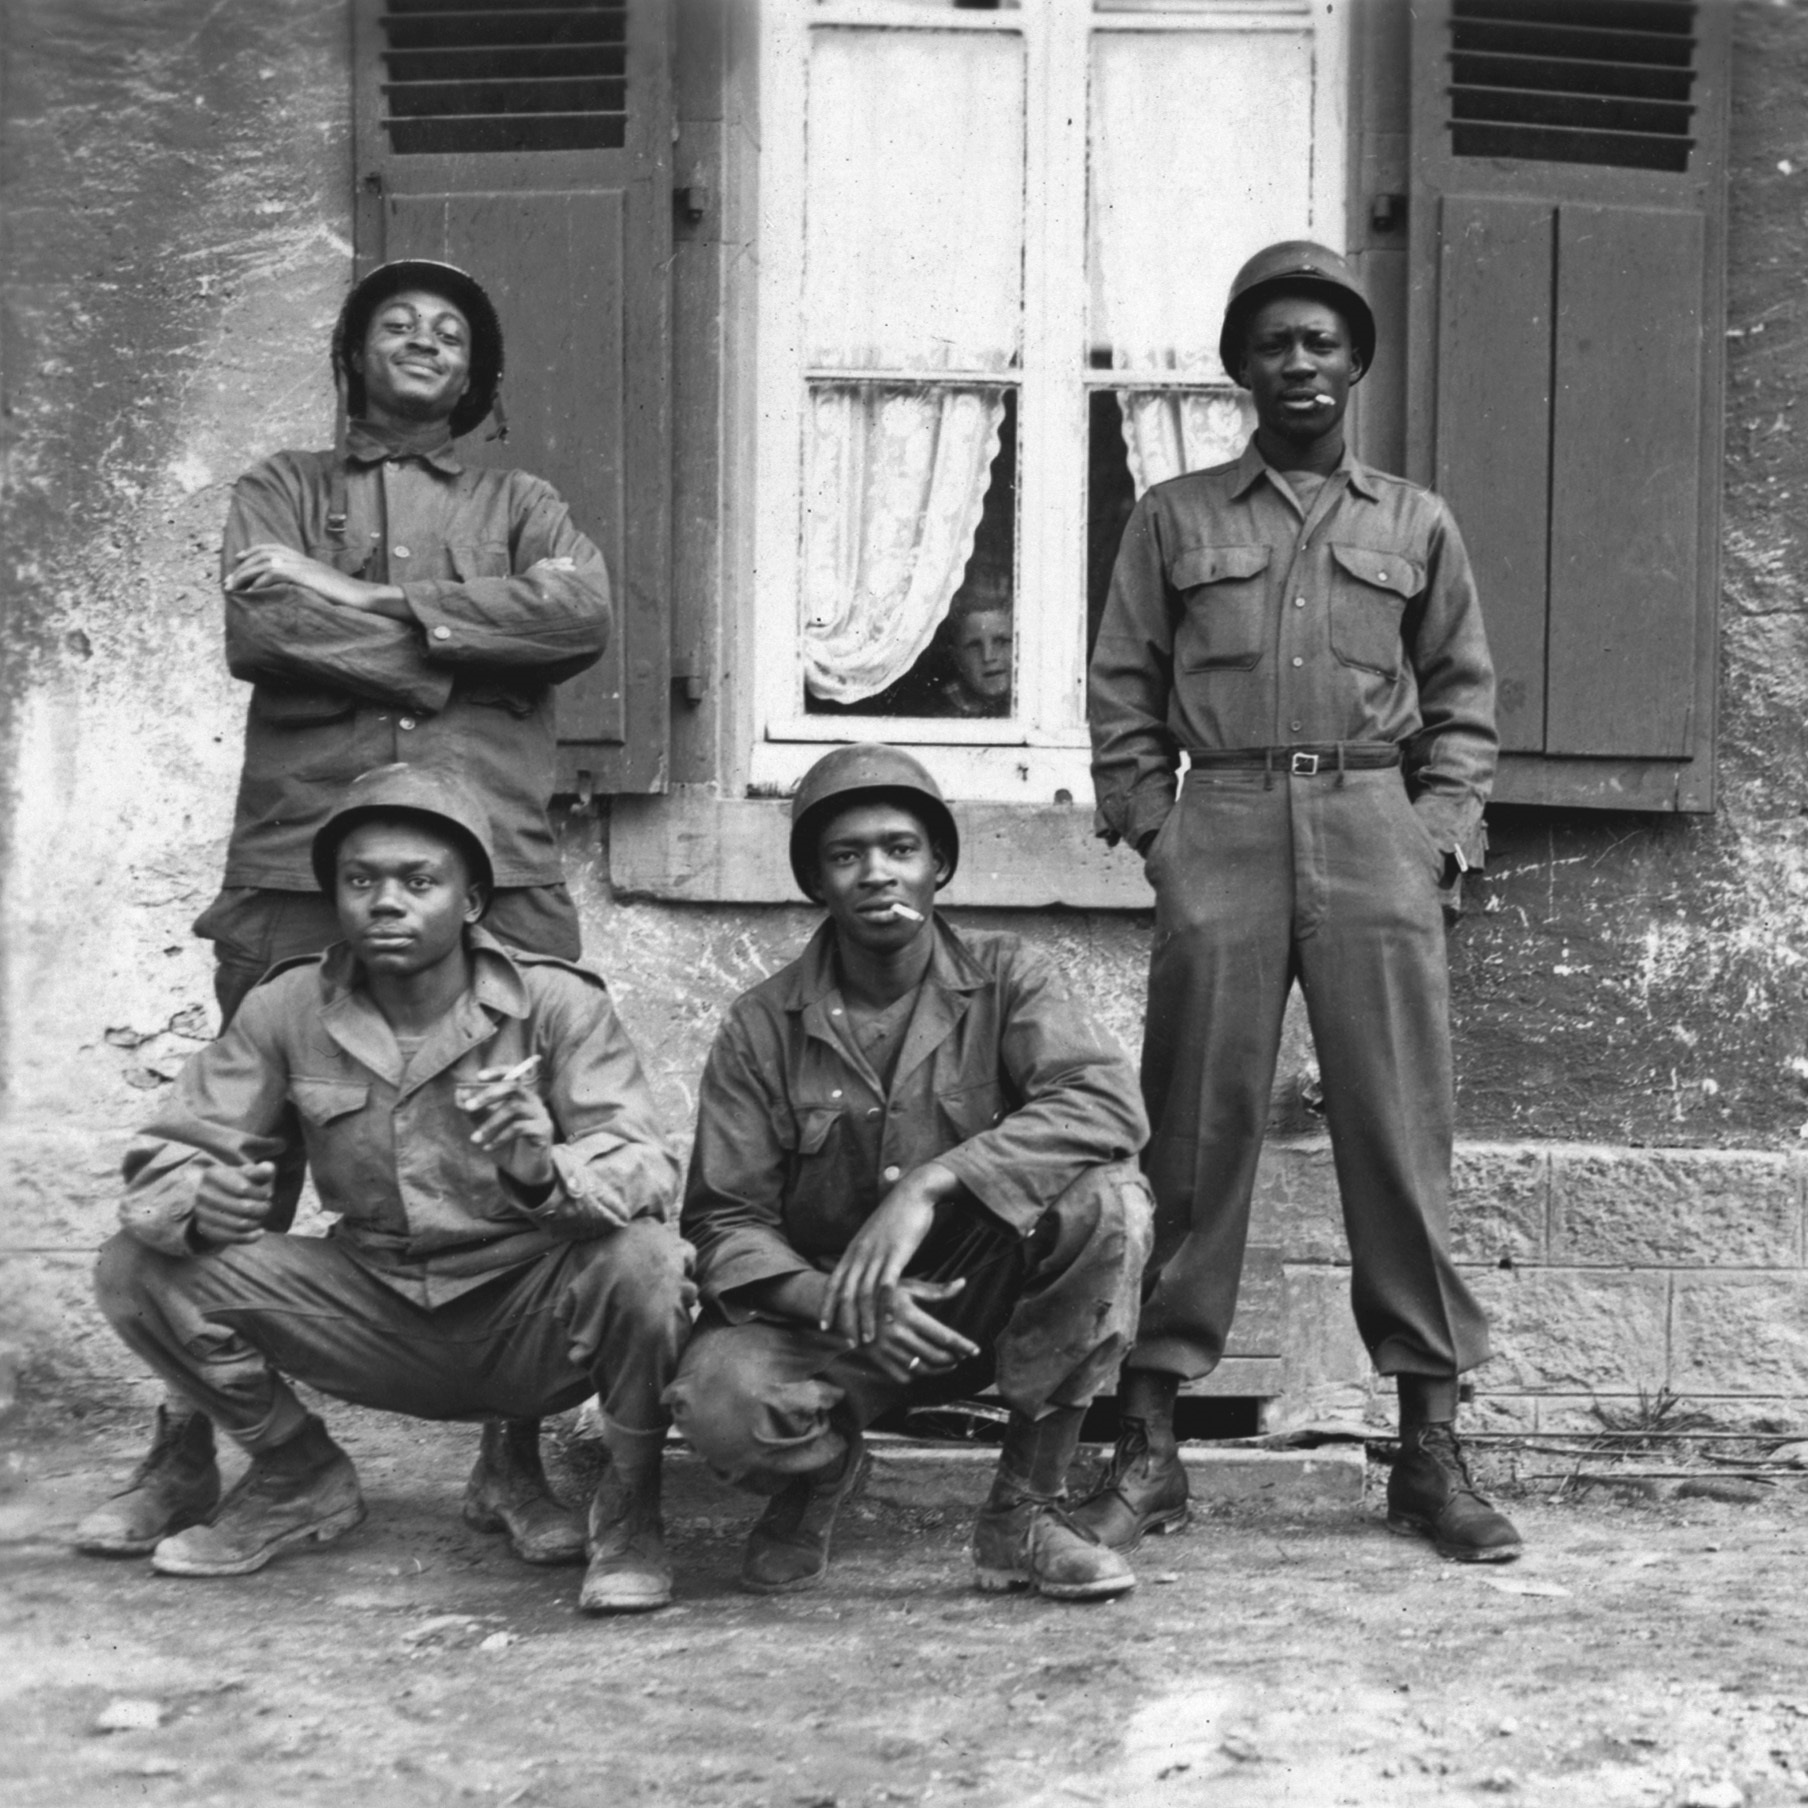 Four soldiers pose outside a window with a child within peering out